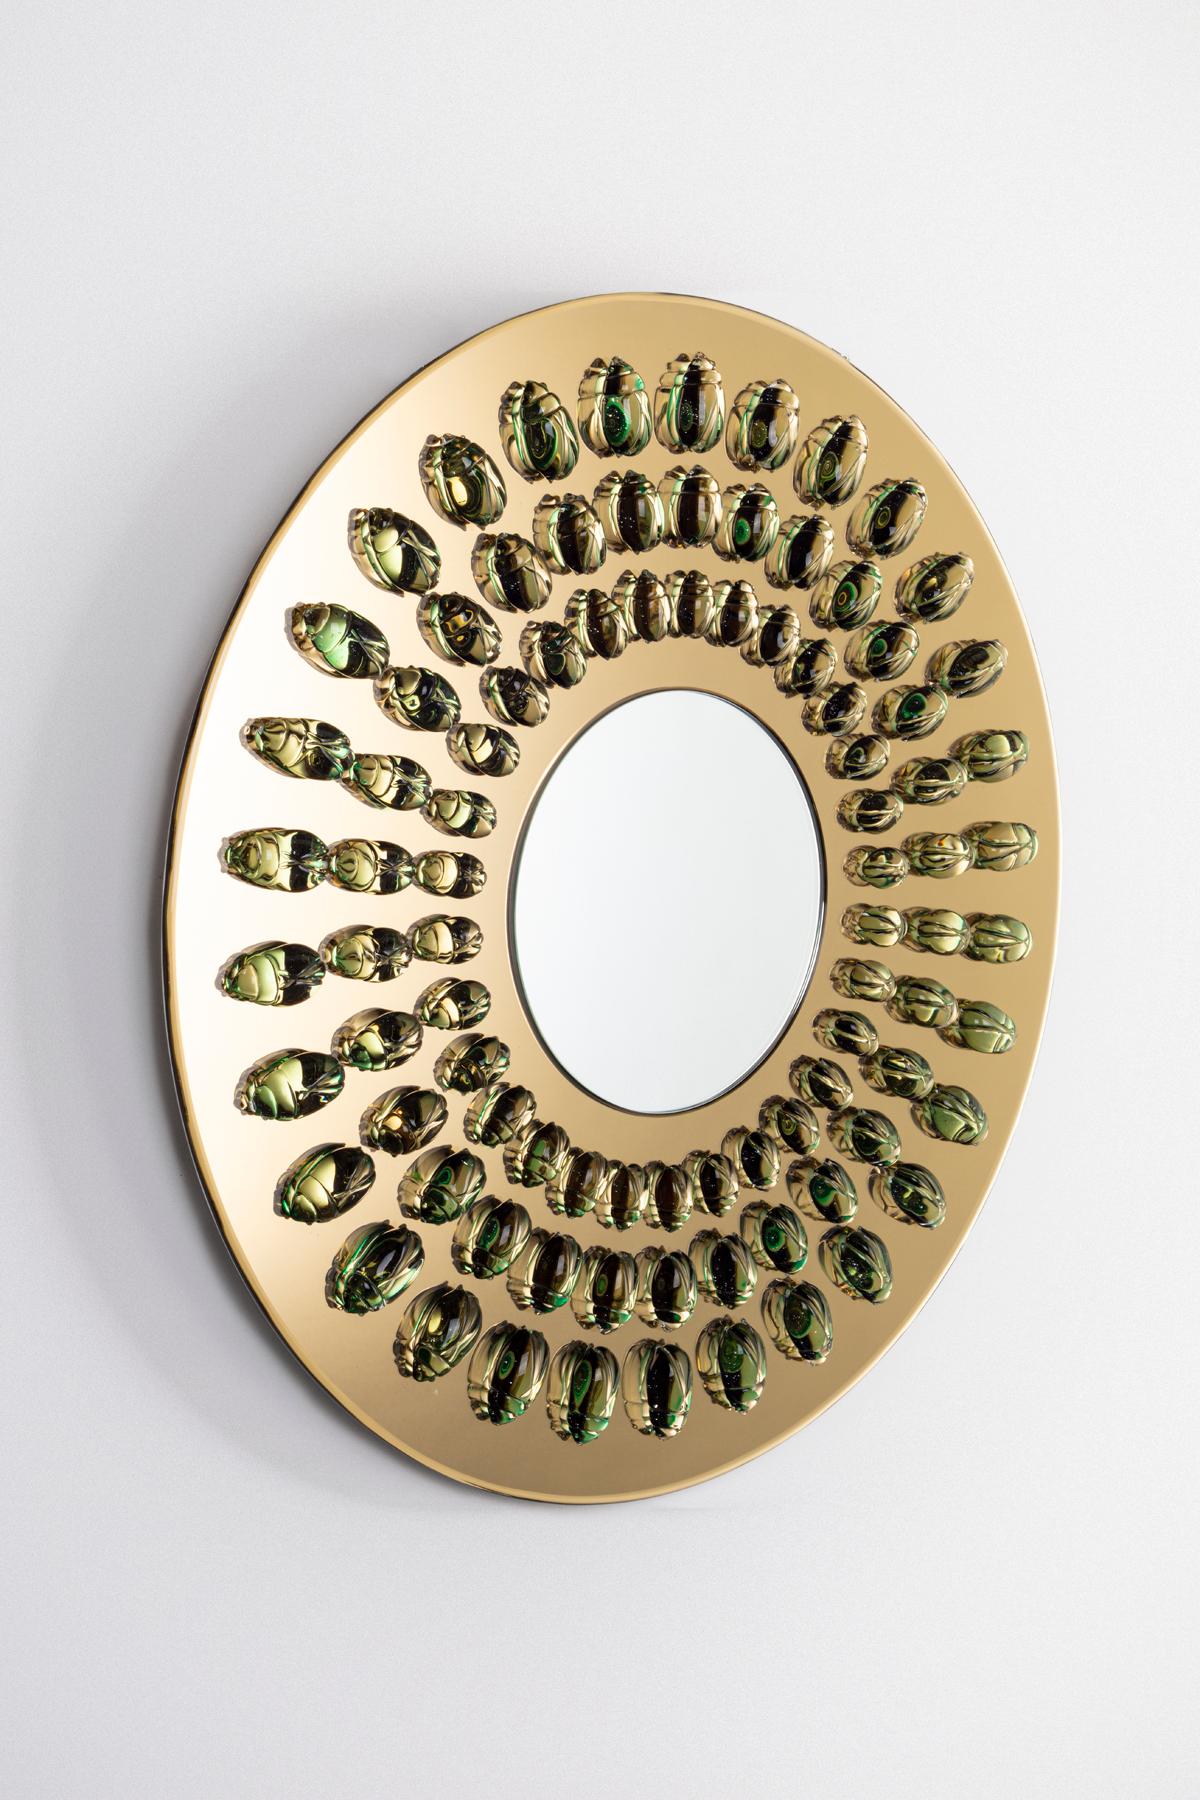 The geometrical arrangement of the glass scarabs on
this rounded mirror create order out of the insects’
sinuous exoskeletons. The increasing scale moving
outward from the center allude to the delicate stage
of metamorphosis.



Duetto is a